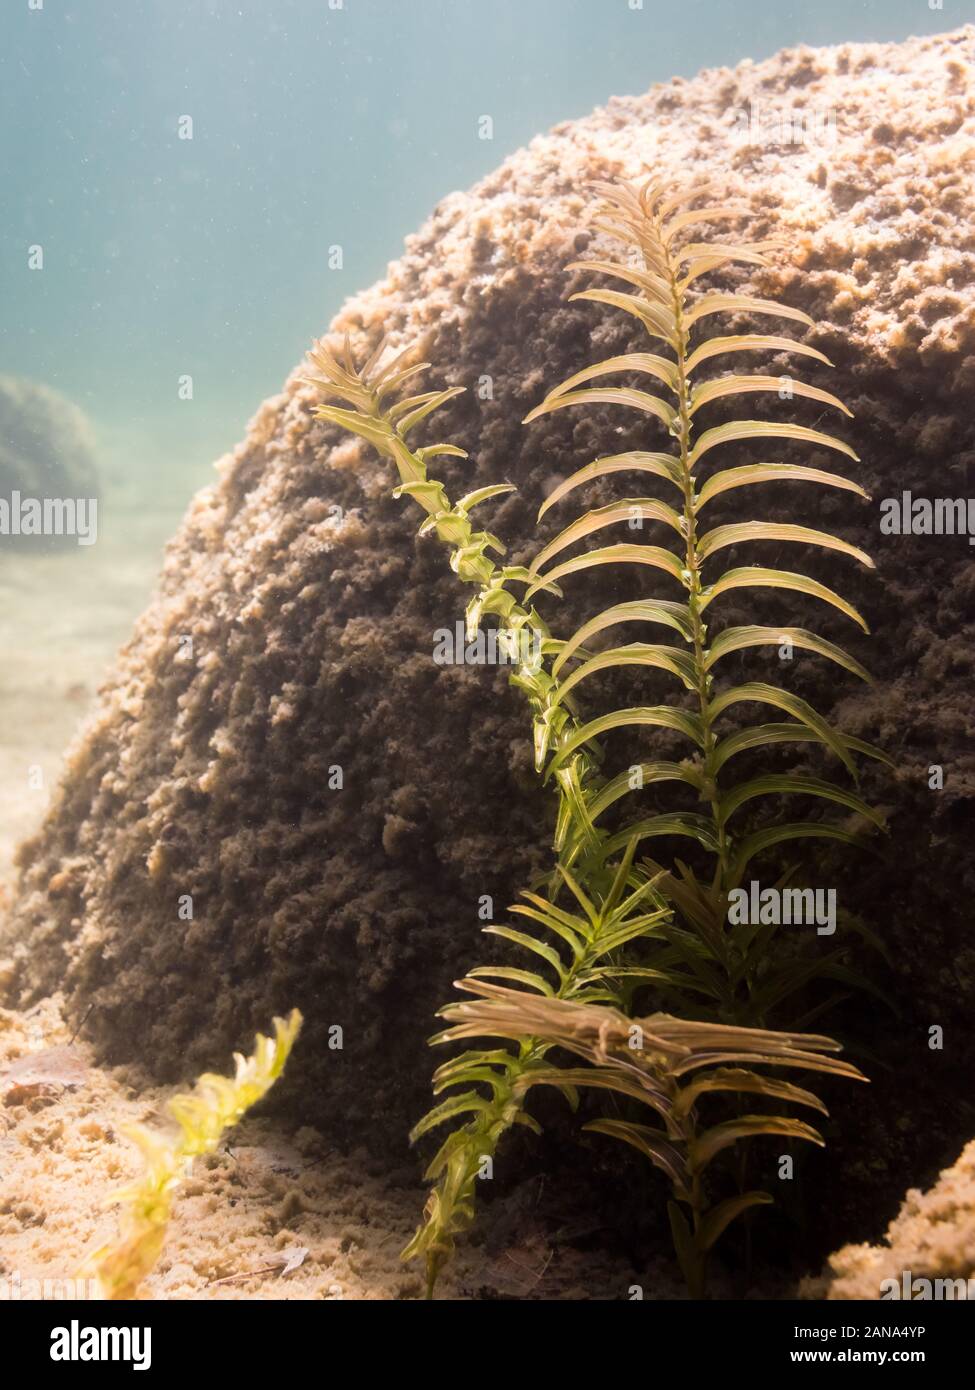 Claspingleaf pondweed growing by a stone in clear-watered lake Stock Photo